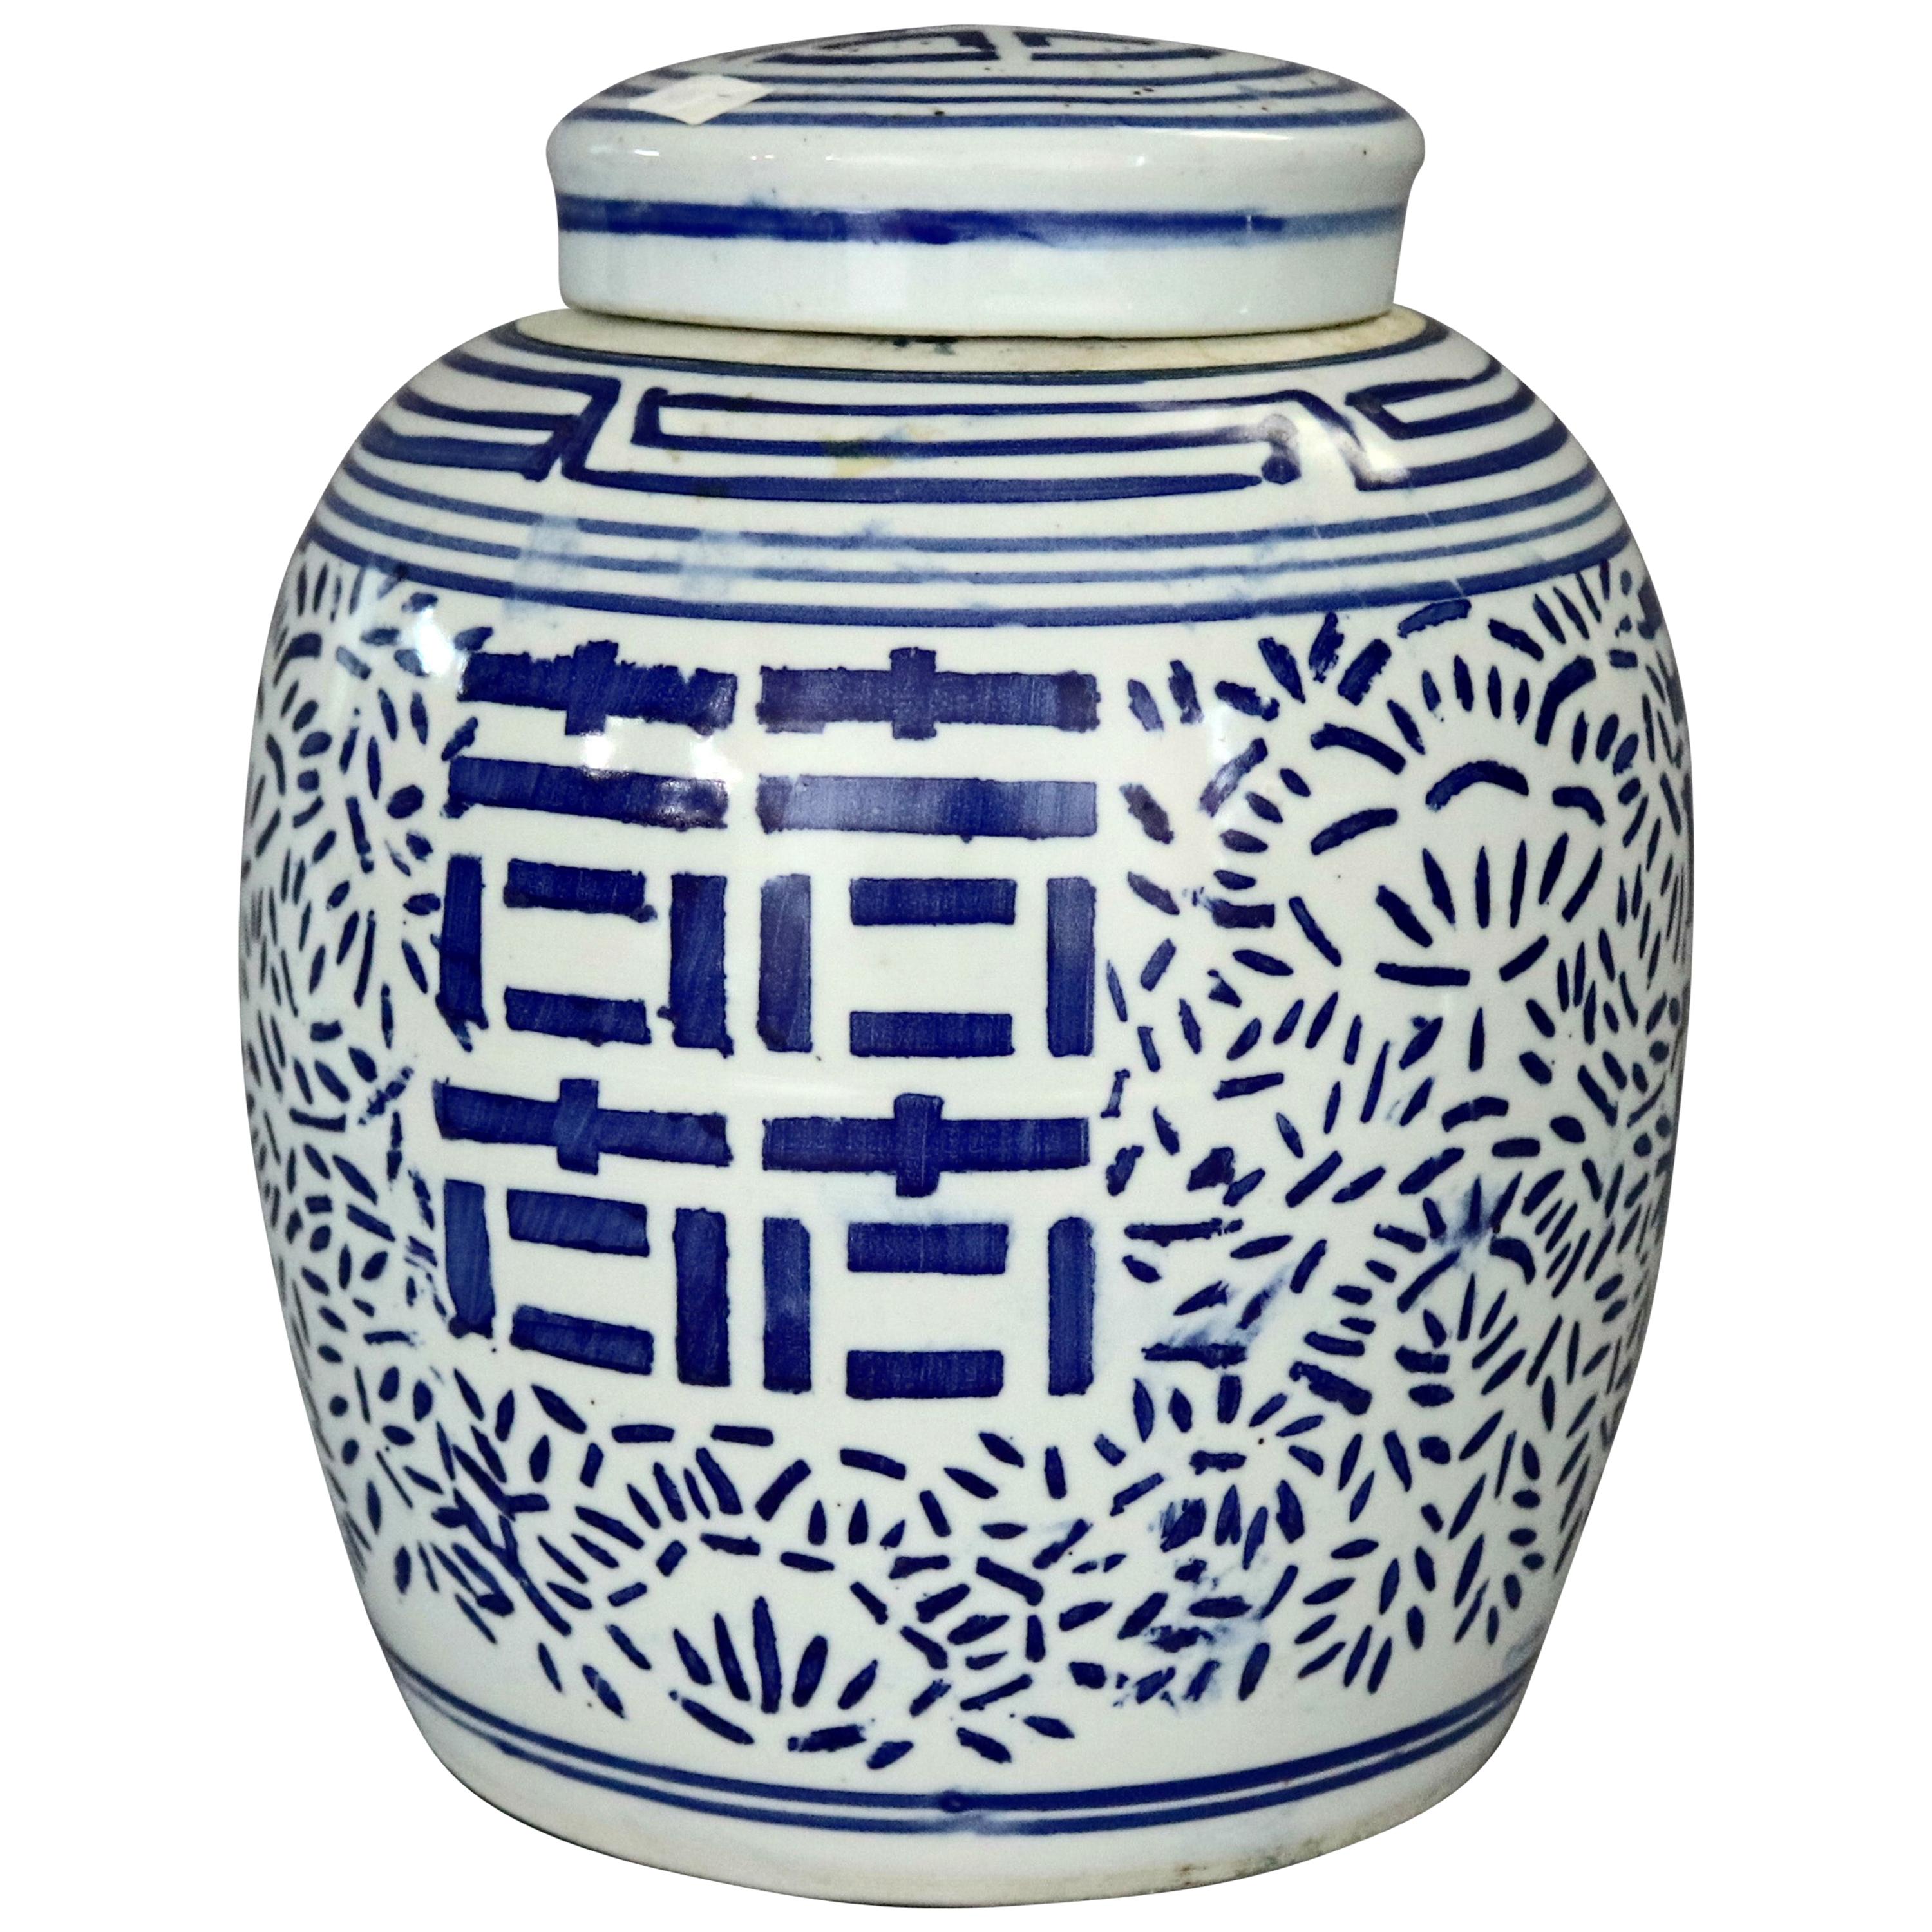 Blue and White Hand Painted Chinoiserie Porcelain Tea Jar with Crackle Finish